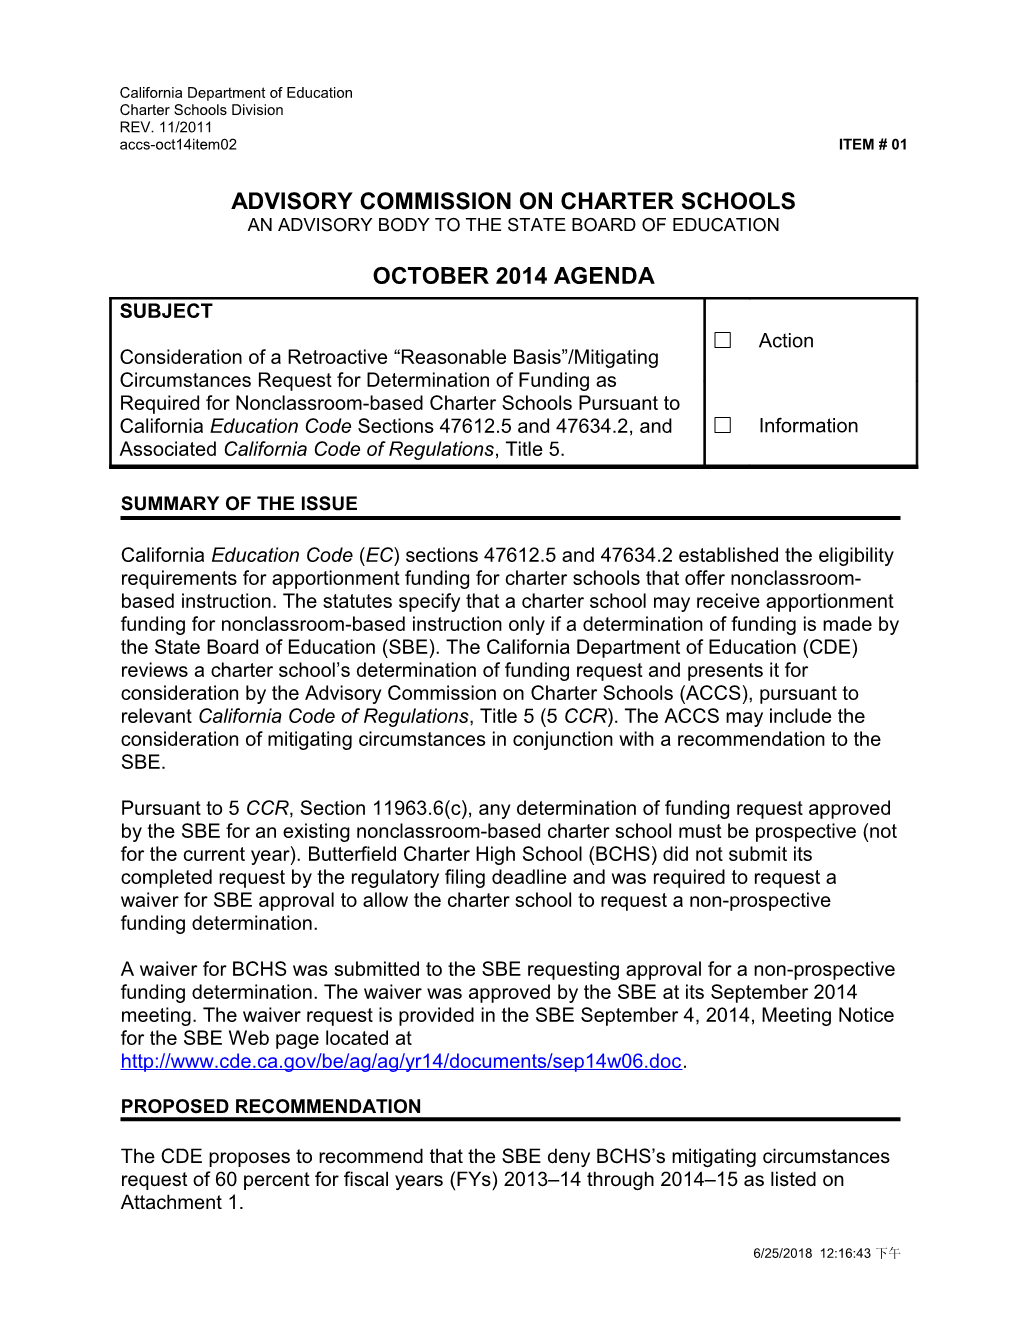 October 2014 ACCS Agenda Item 02 - Advisory Commission on Charter Schools (CA State Board